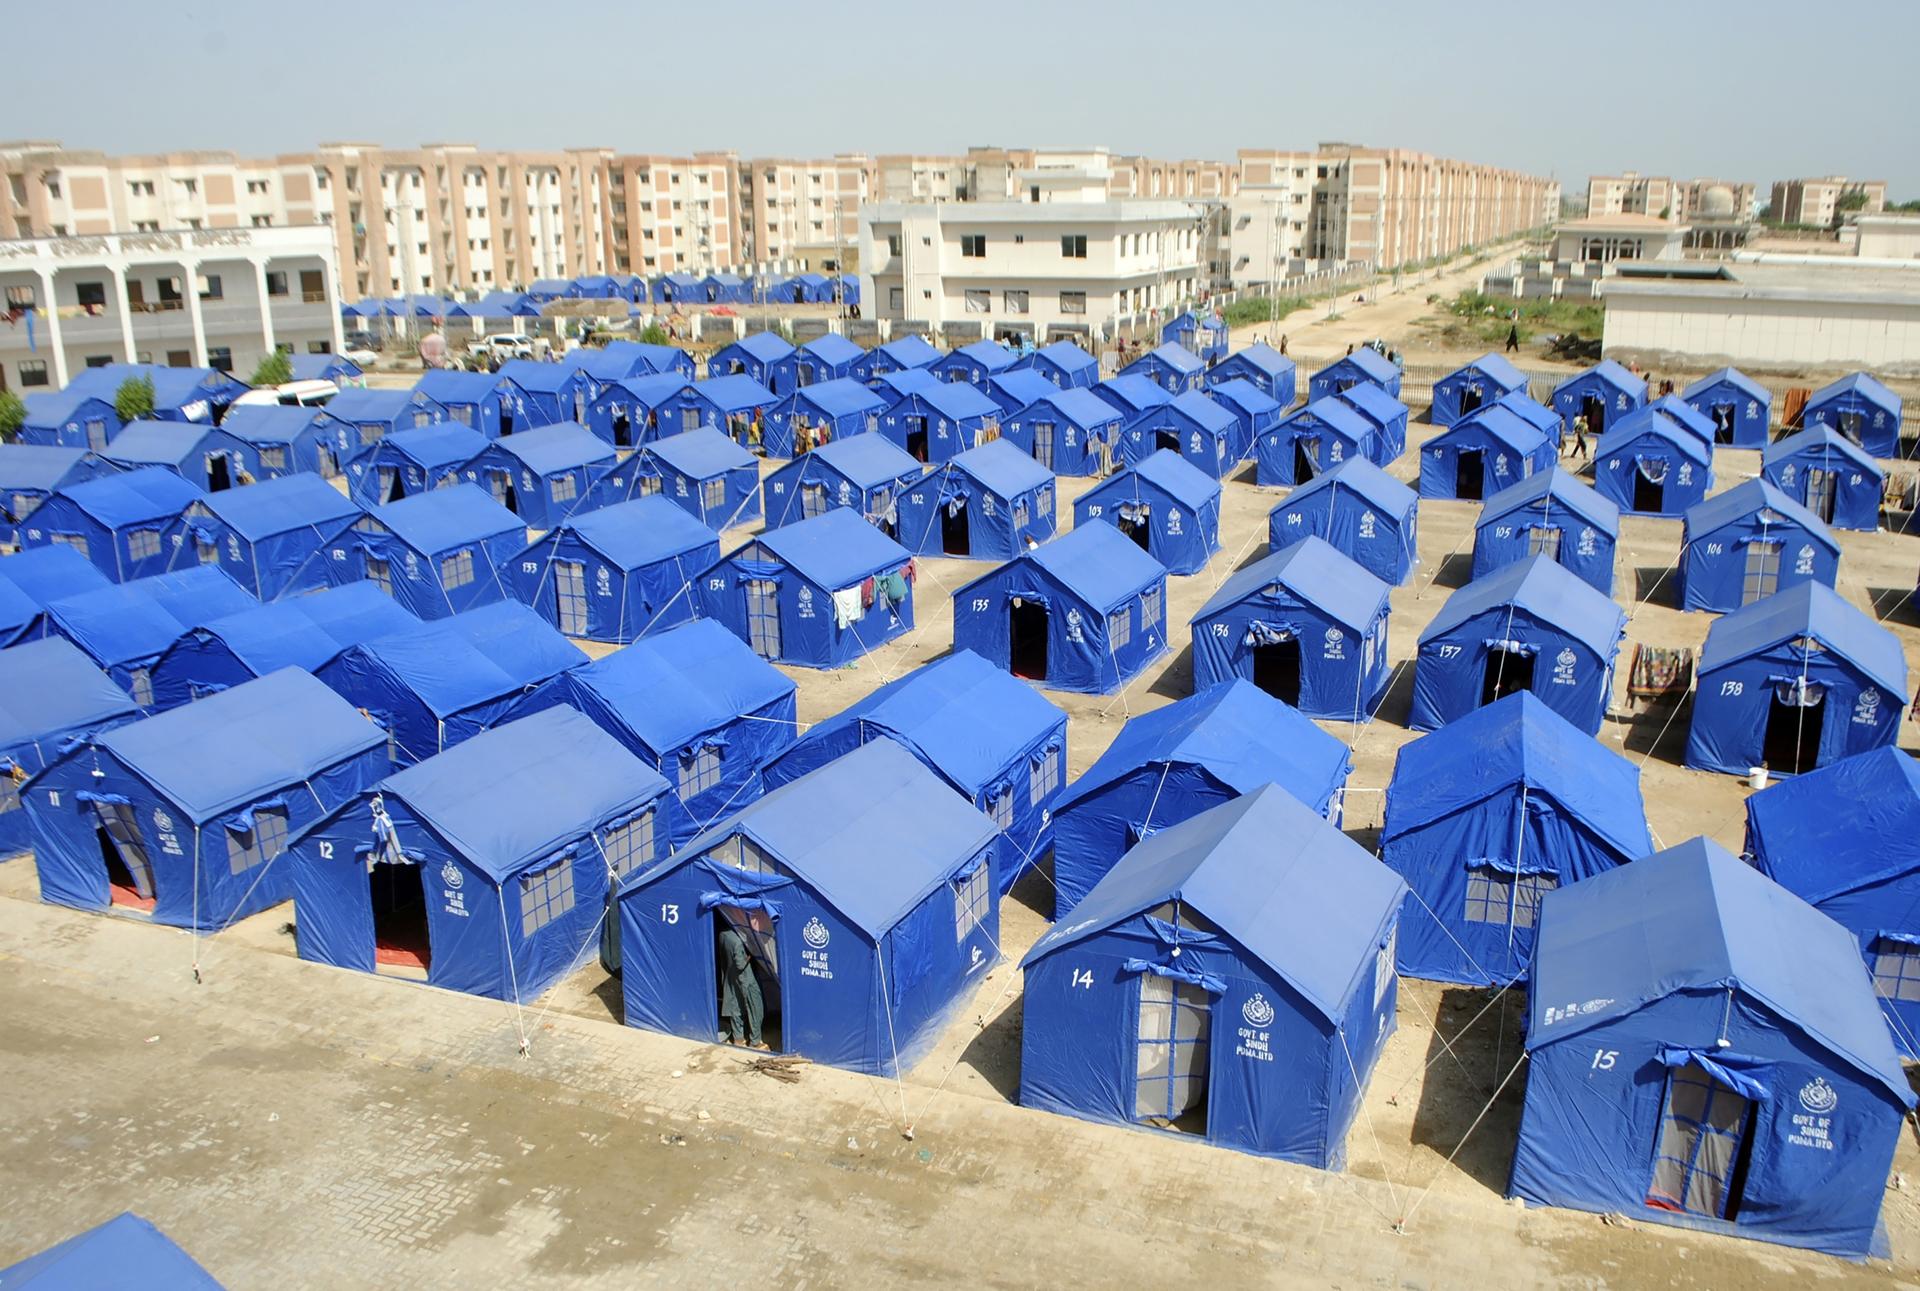 Temporary housing is constructed for flood victims in Hyderabad, Pakistan